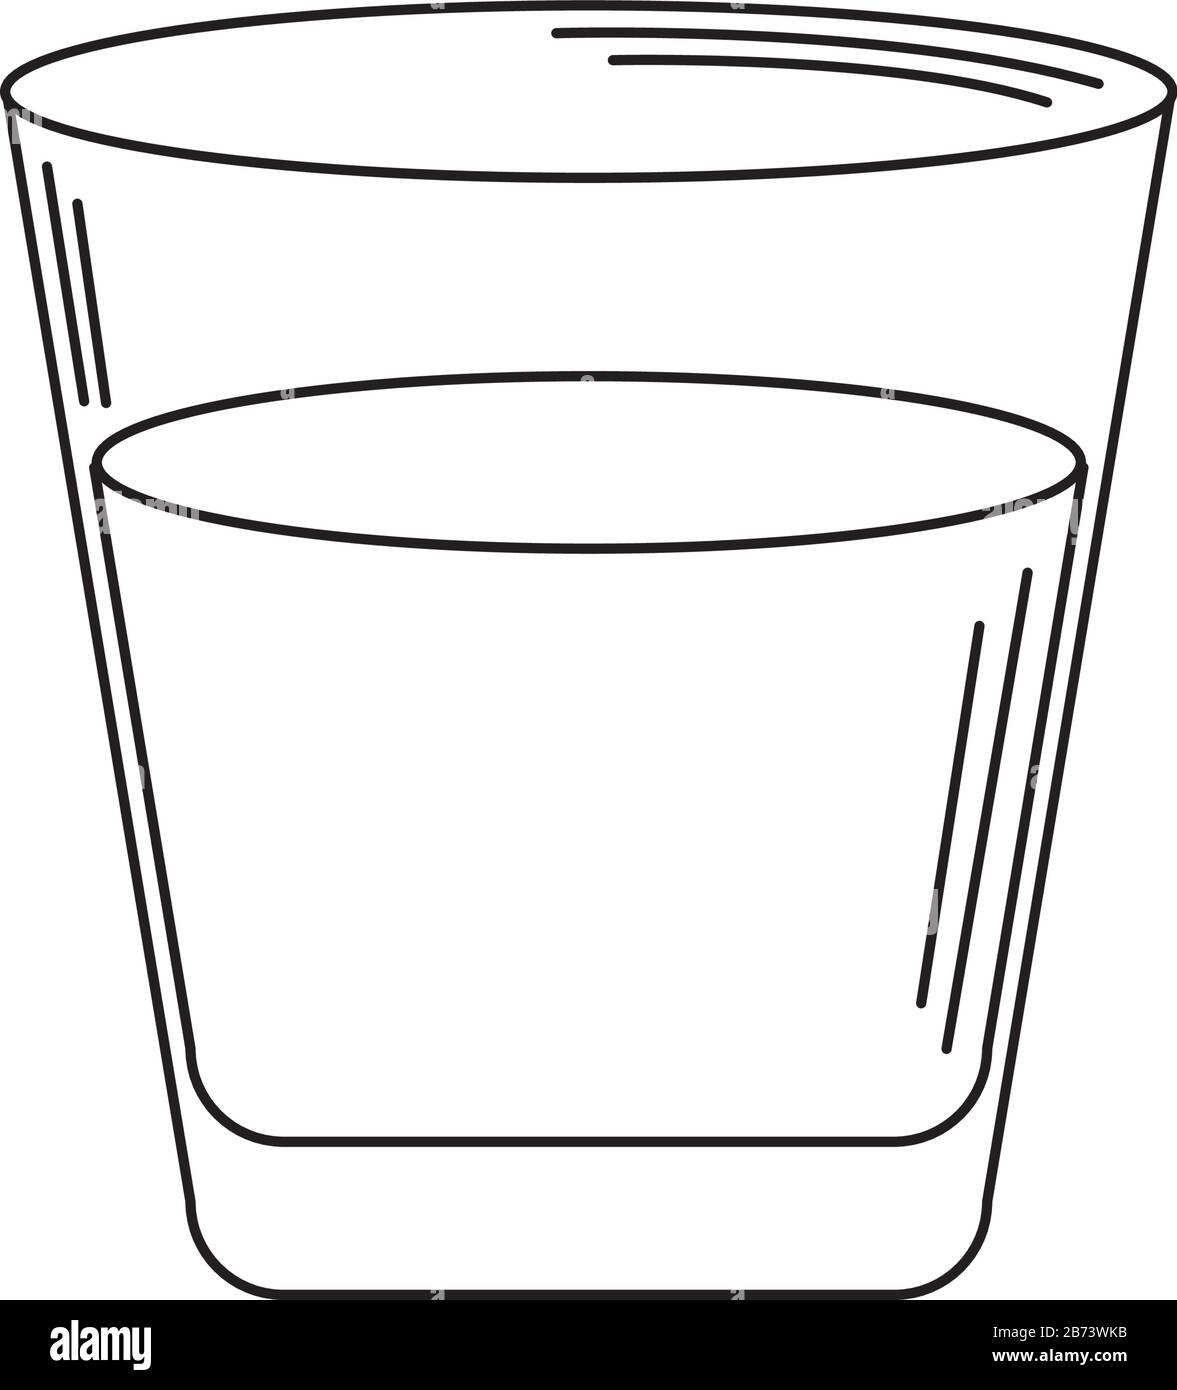 https://c8.alamy.com/comp/2B73WKB/drinks-glass-cup-of-water-or-juice-with-straw-vector-illustration-line-style-icon-2B73WKB.jpg